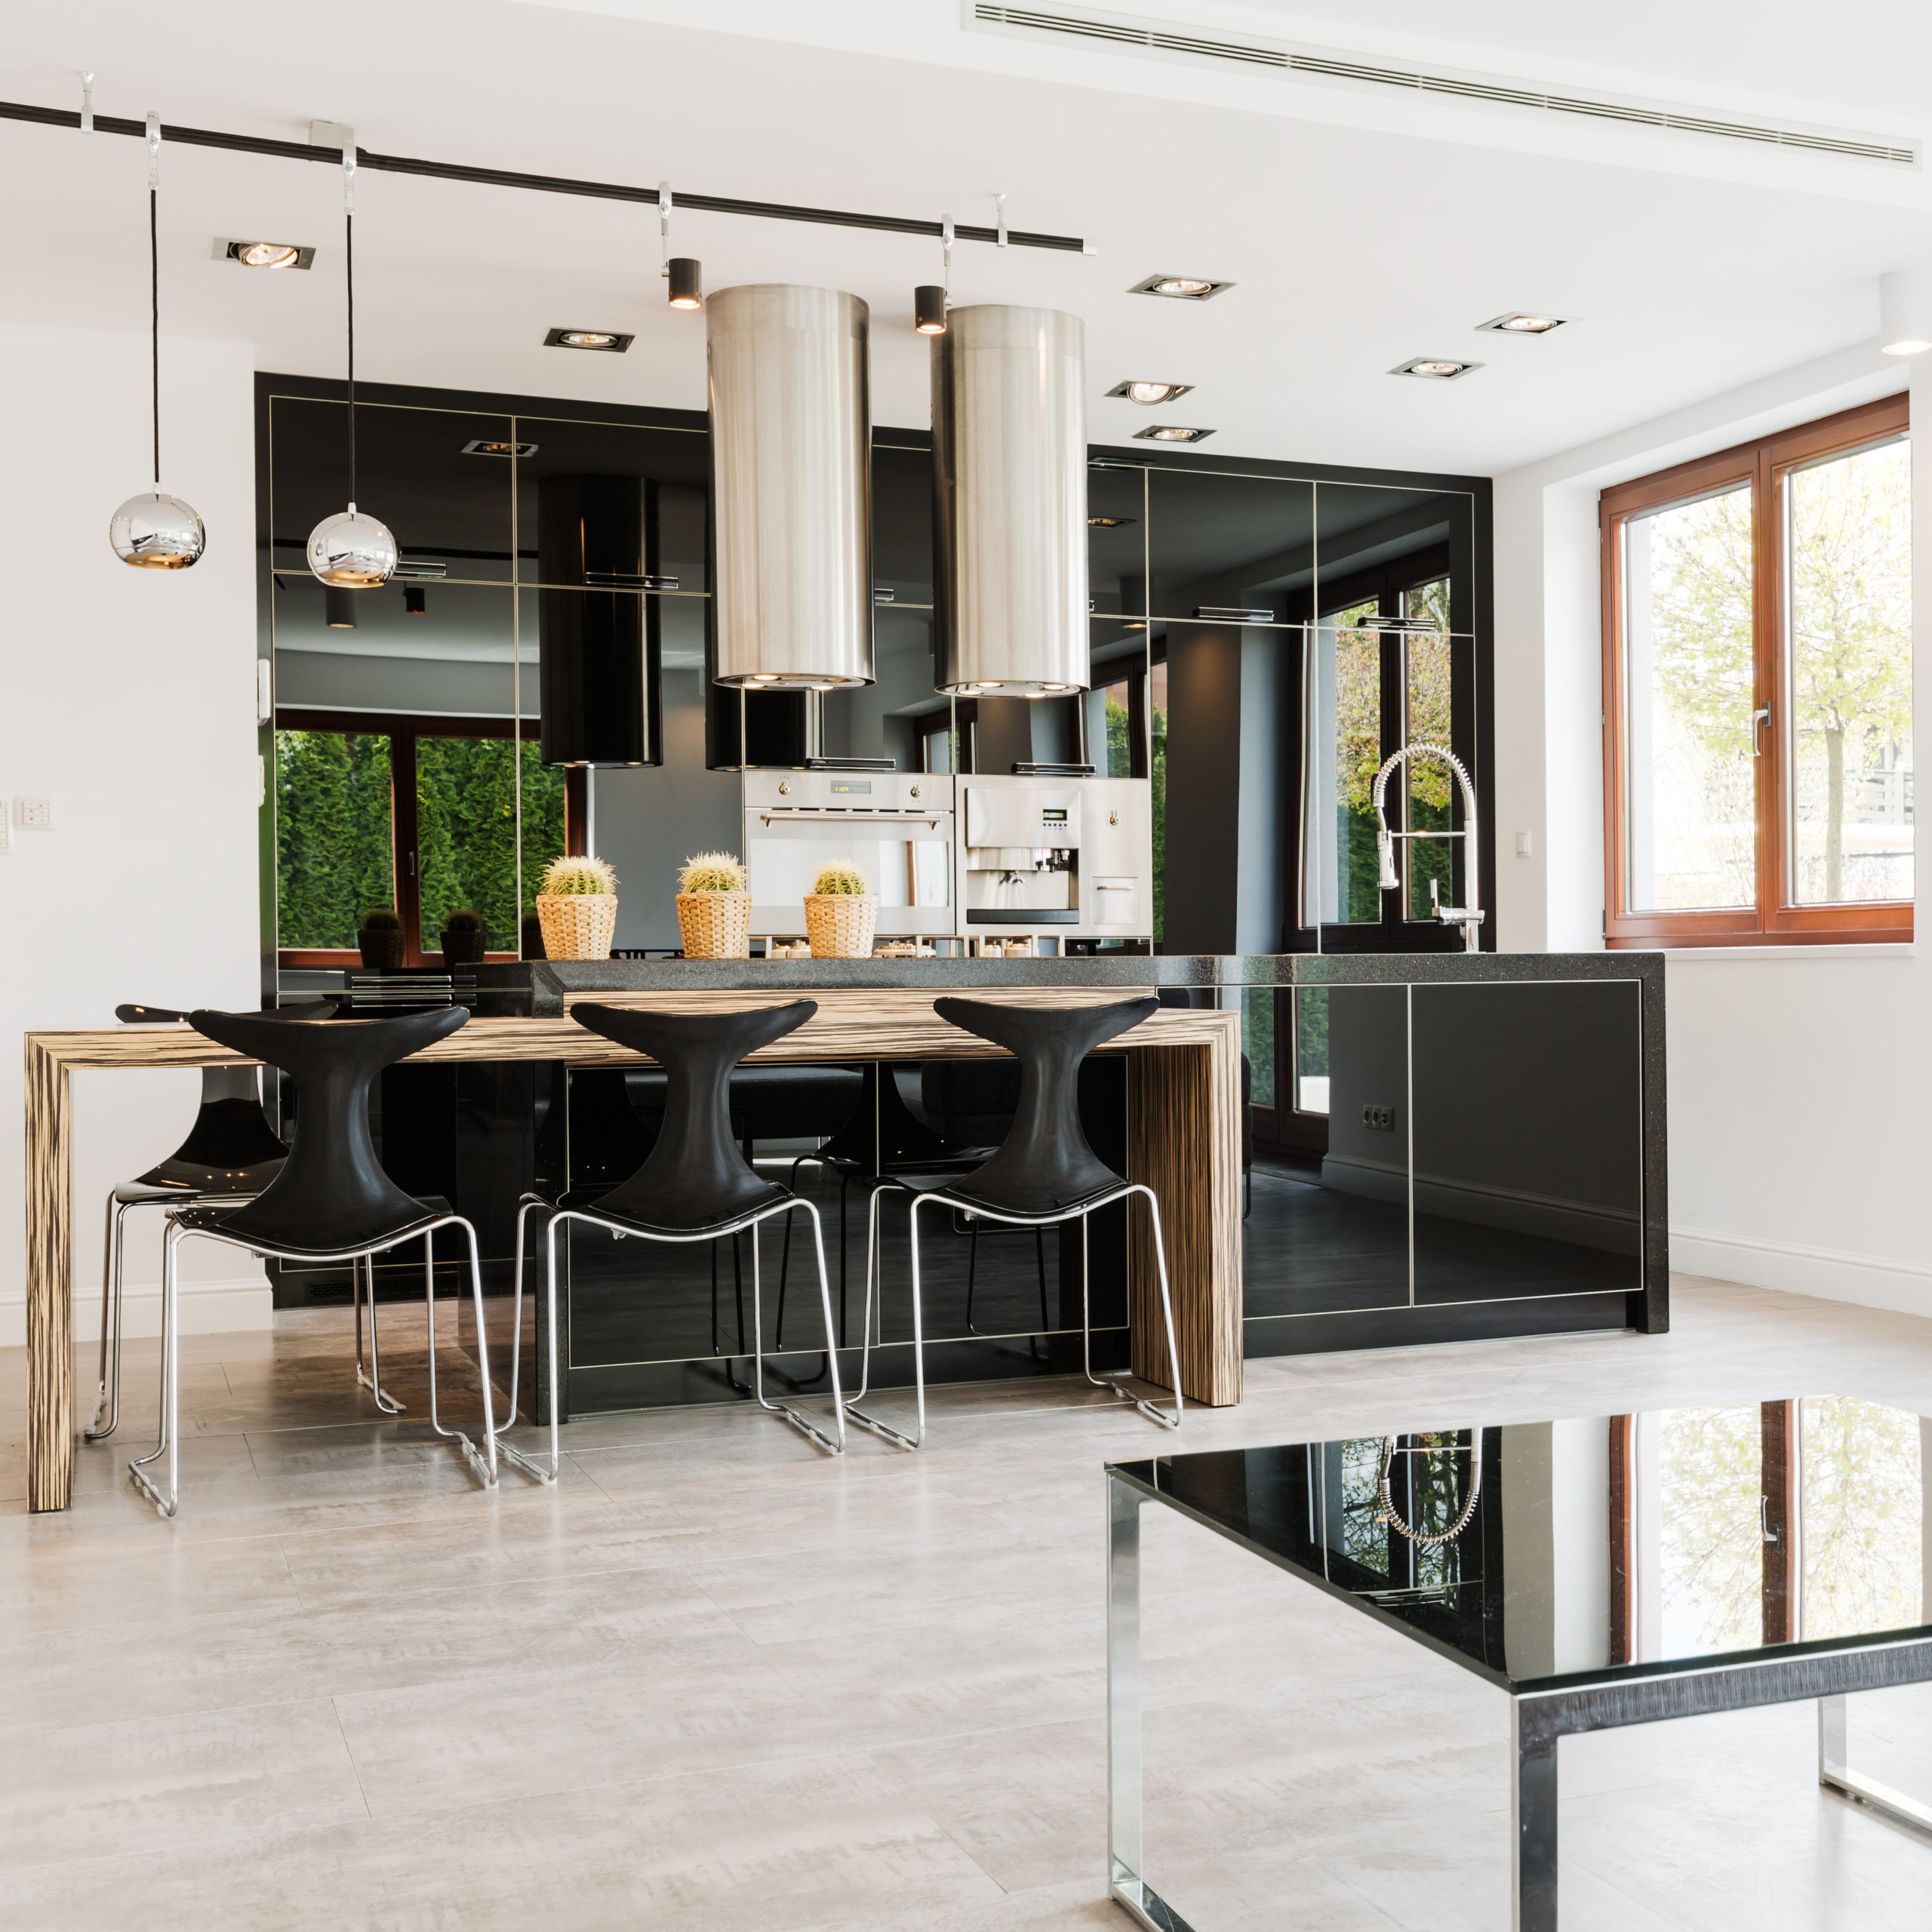 open-kitchen-with-high-gloss-cabinets-sample-image1456